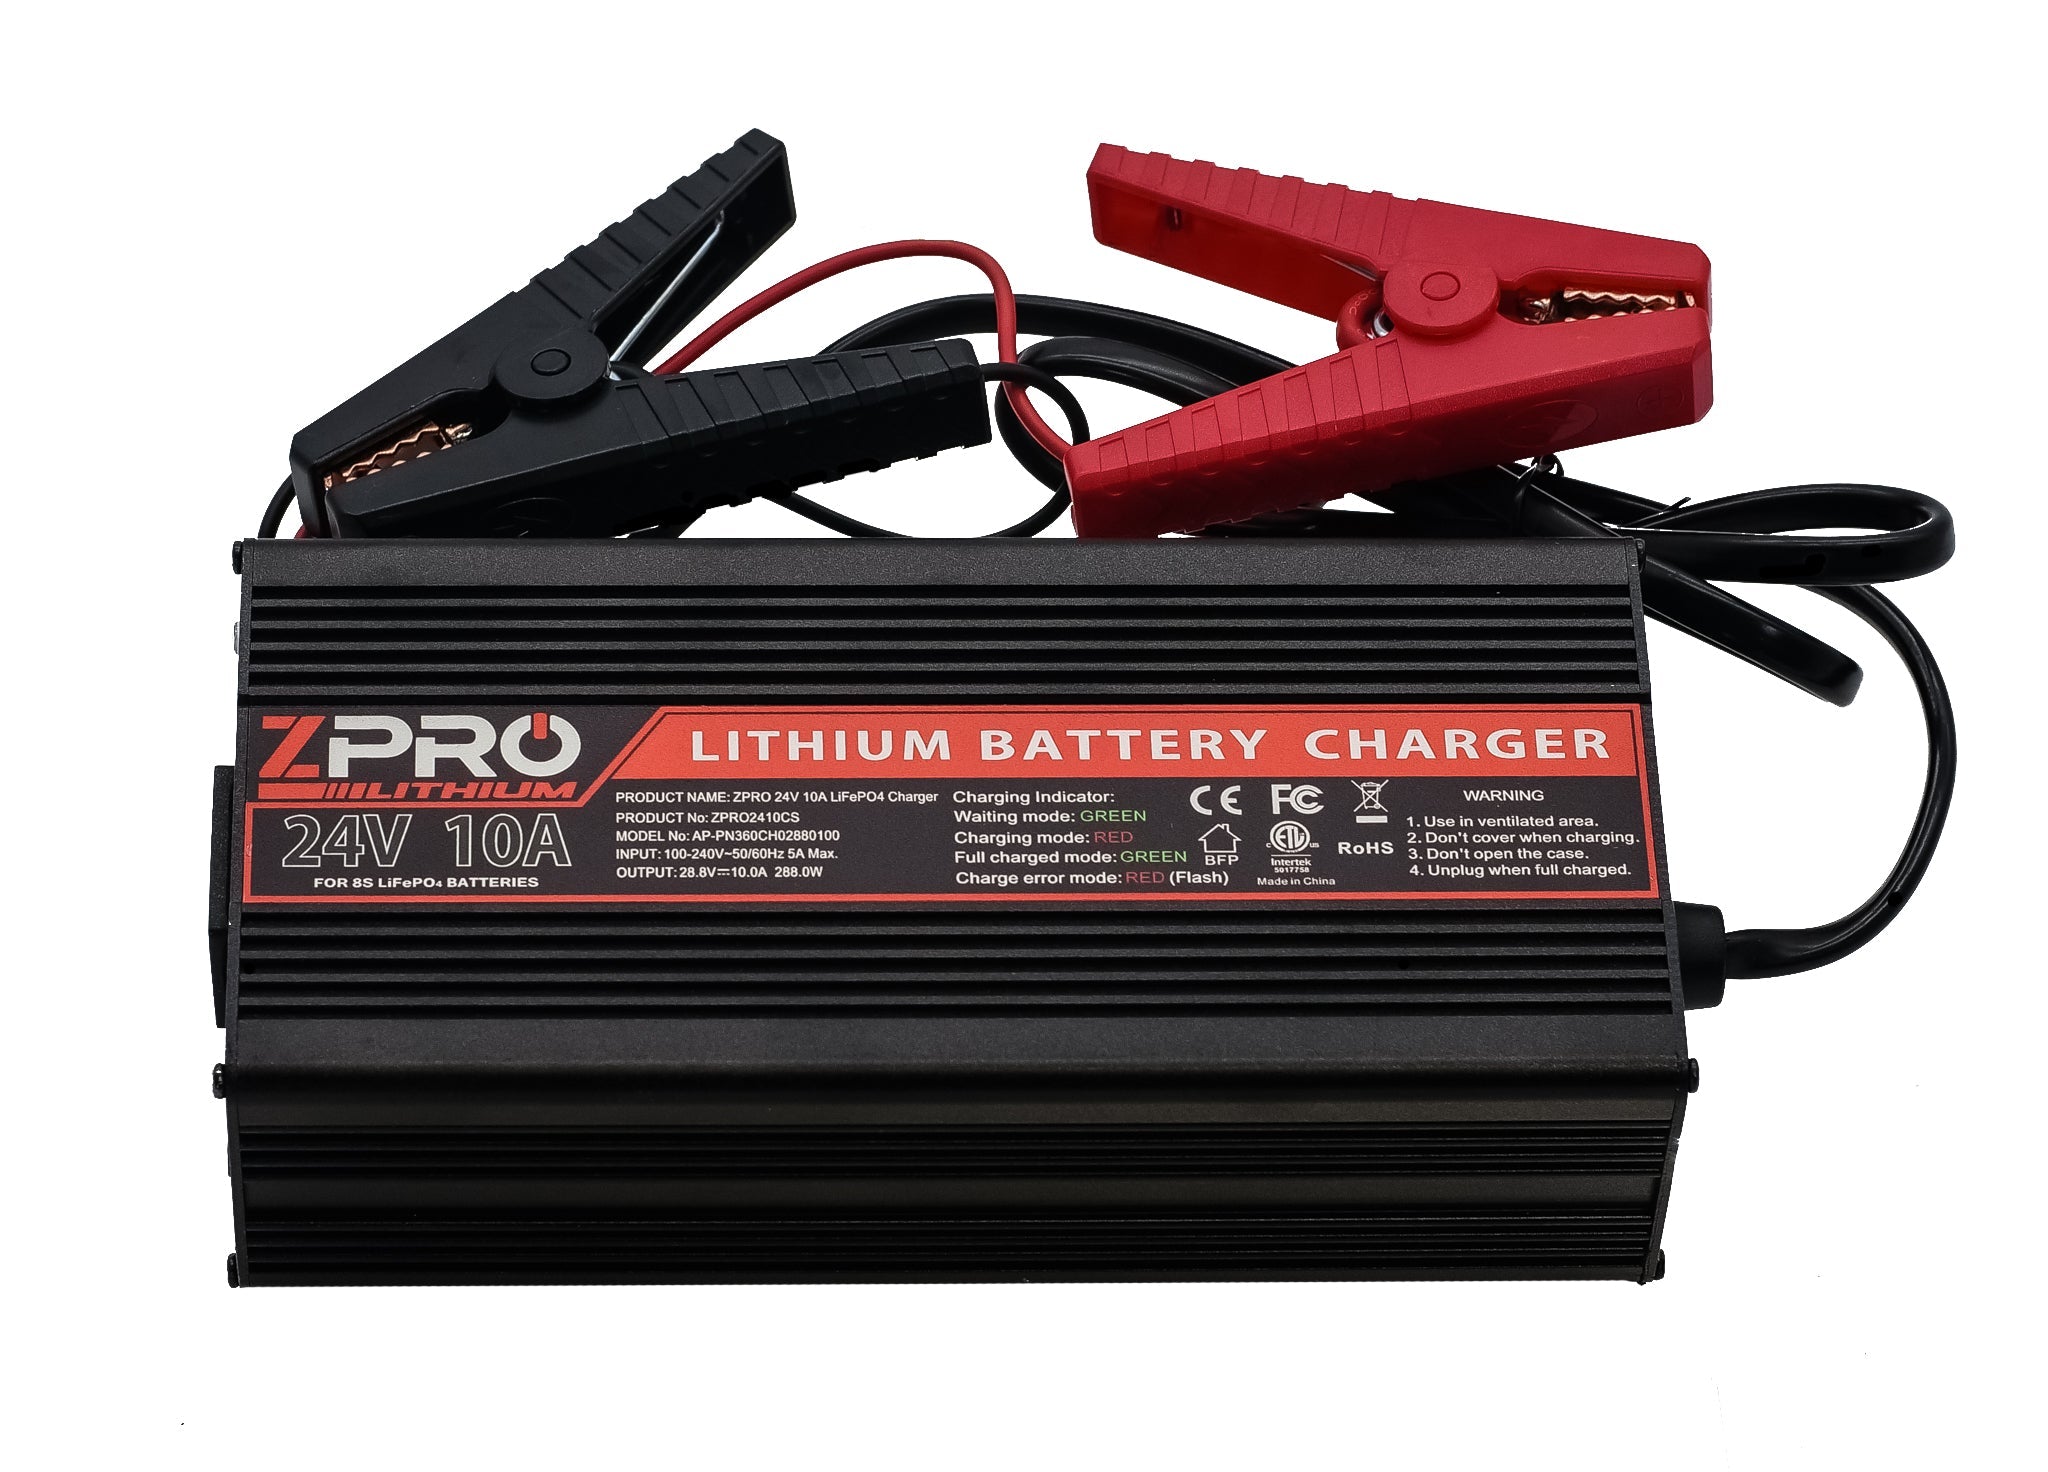 24V10A LITHIUM CHARGER - 0